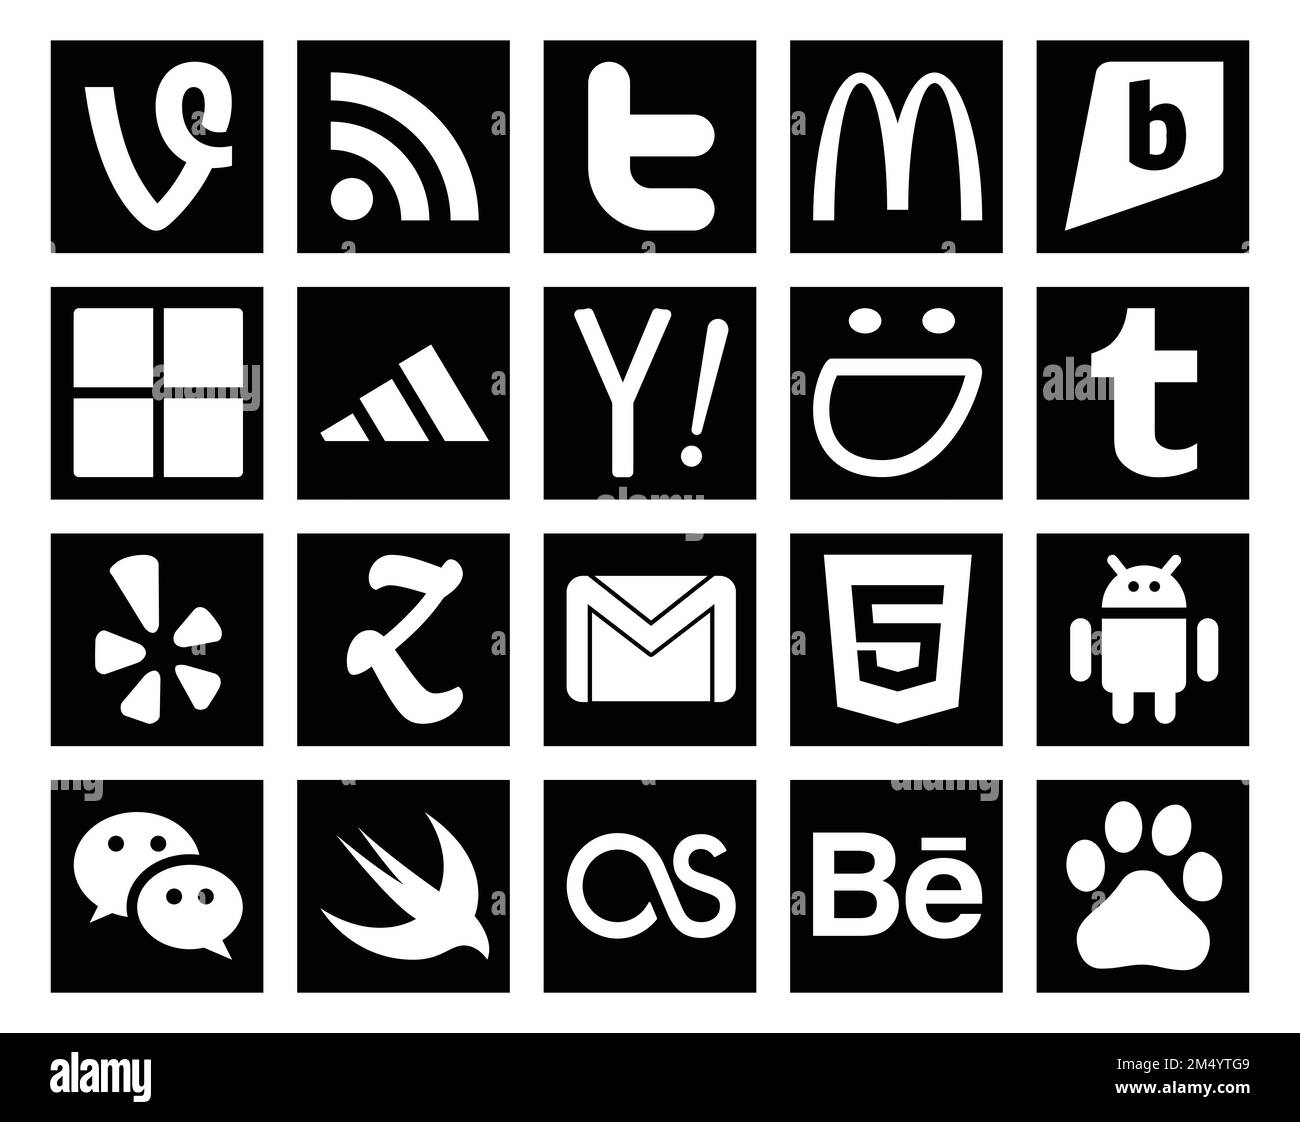 20 Social Media Icon Pack Including html. email. yahoo. gmail. yelp Stock Vector